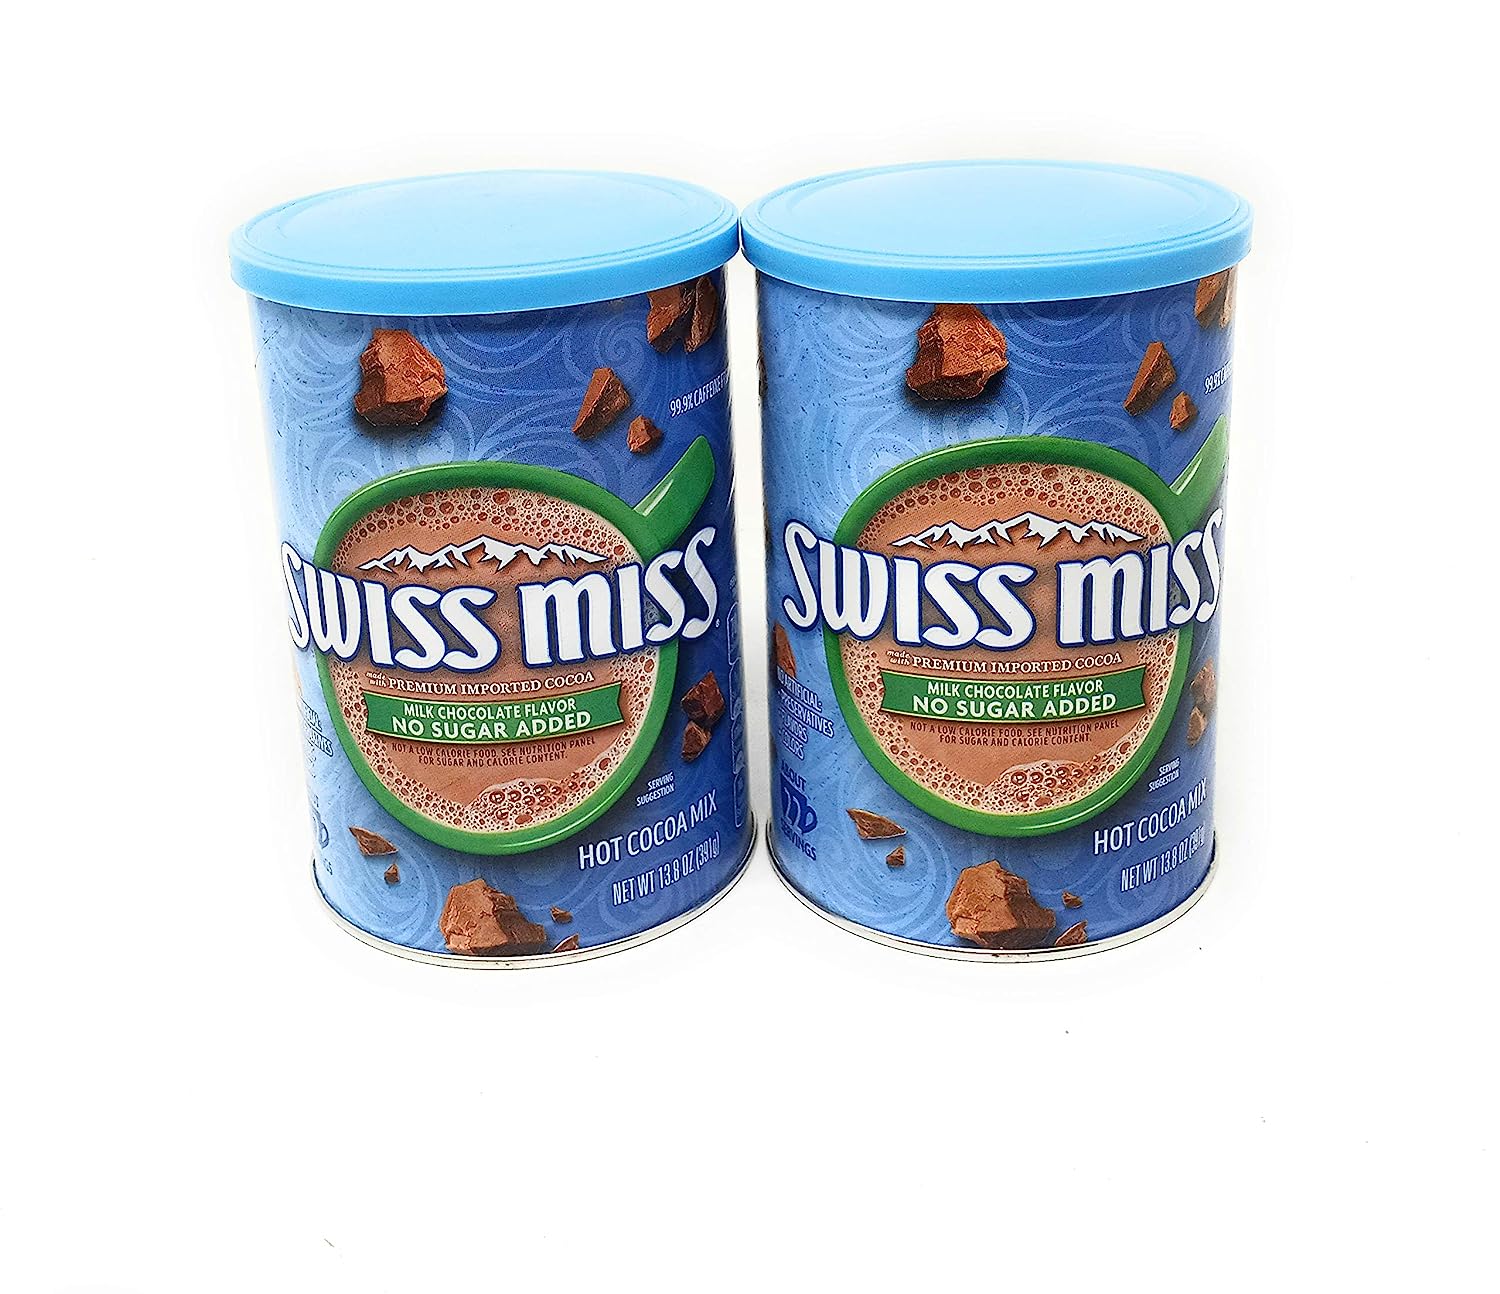 Swiss Miss, Hot Cocoa Mix, No Sugar Added - 2 Pack